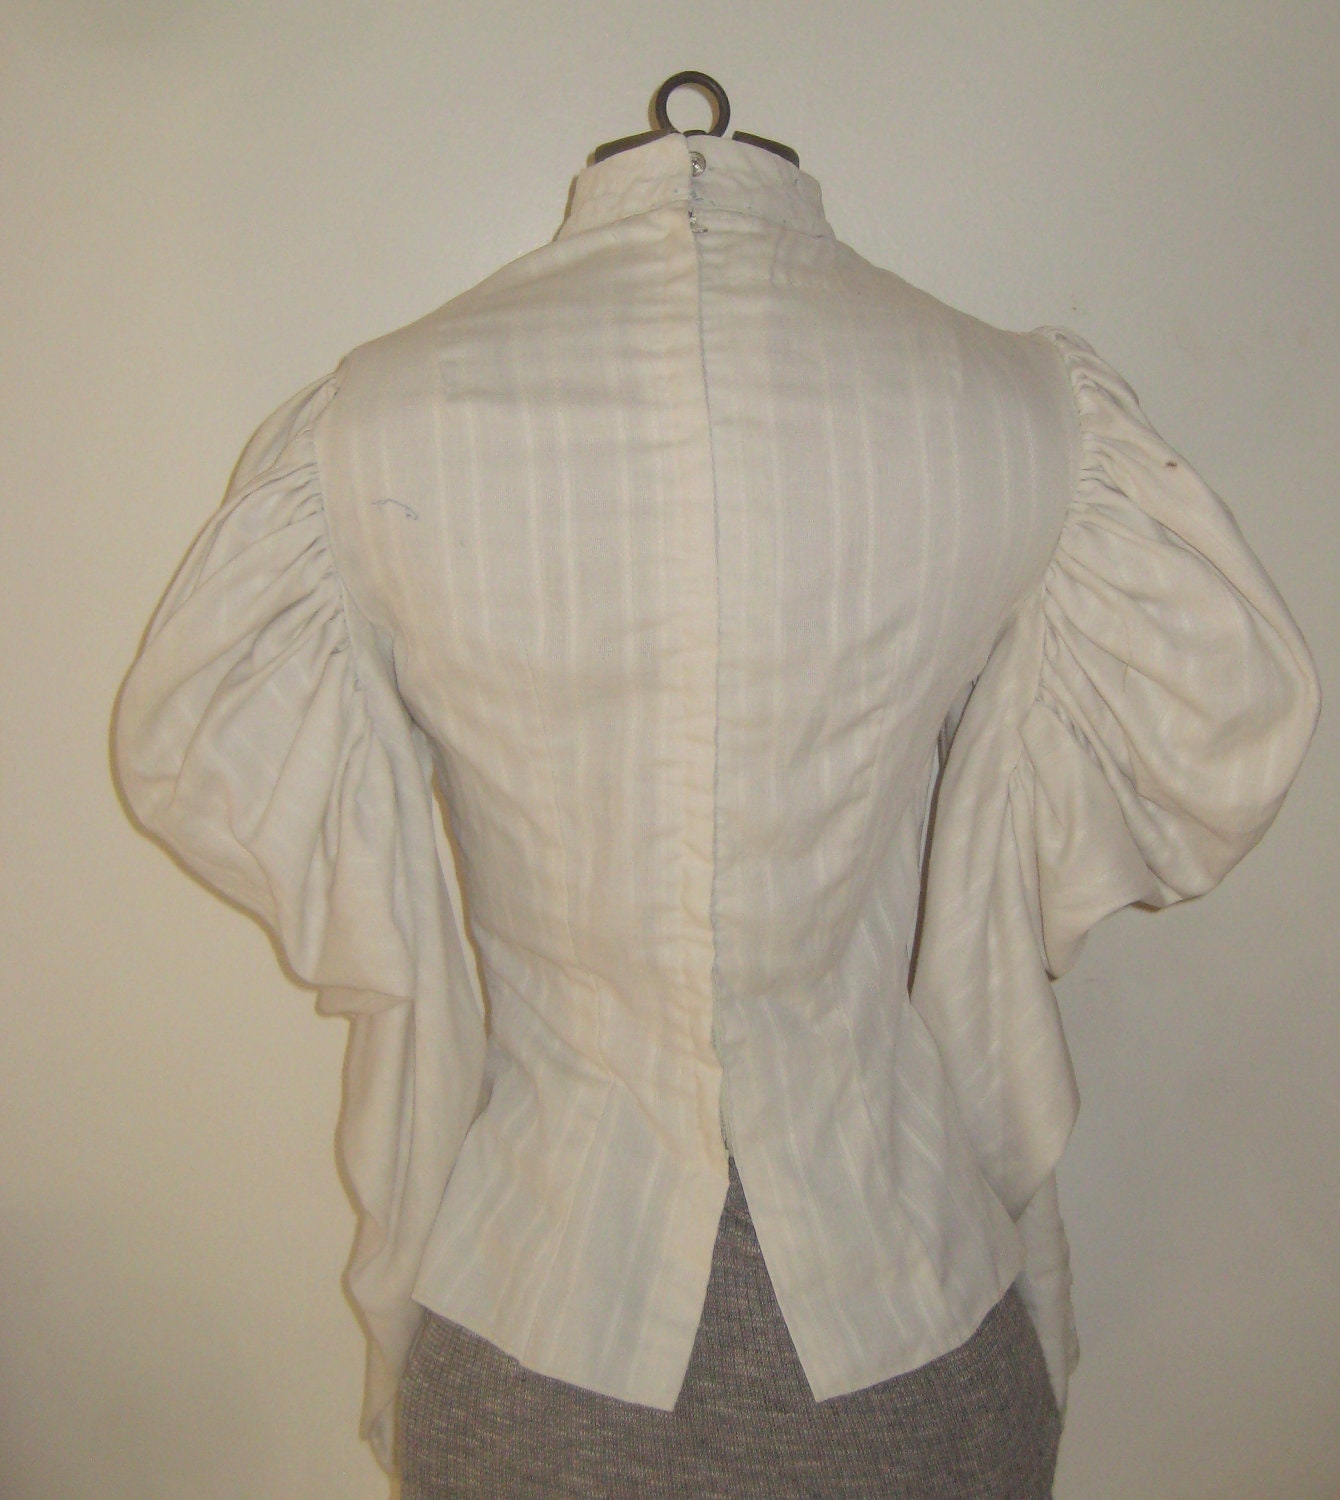 Gibson Girl white blouse 1900's or 1940's steampunk